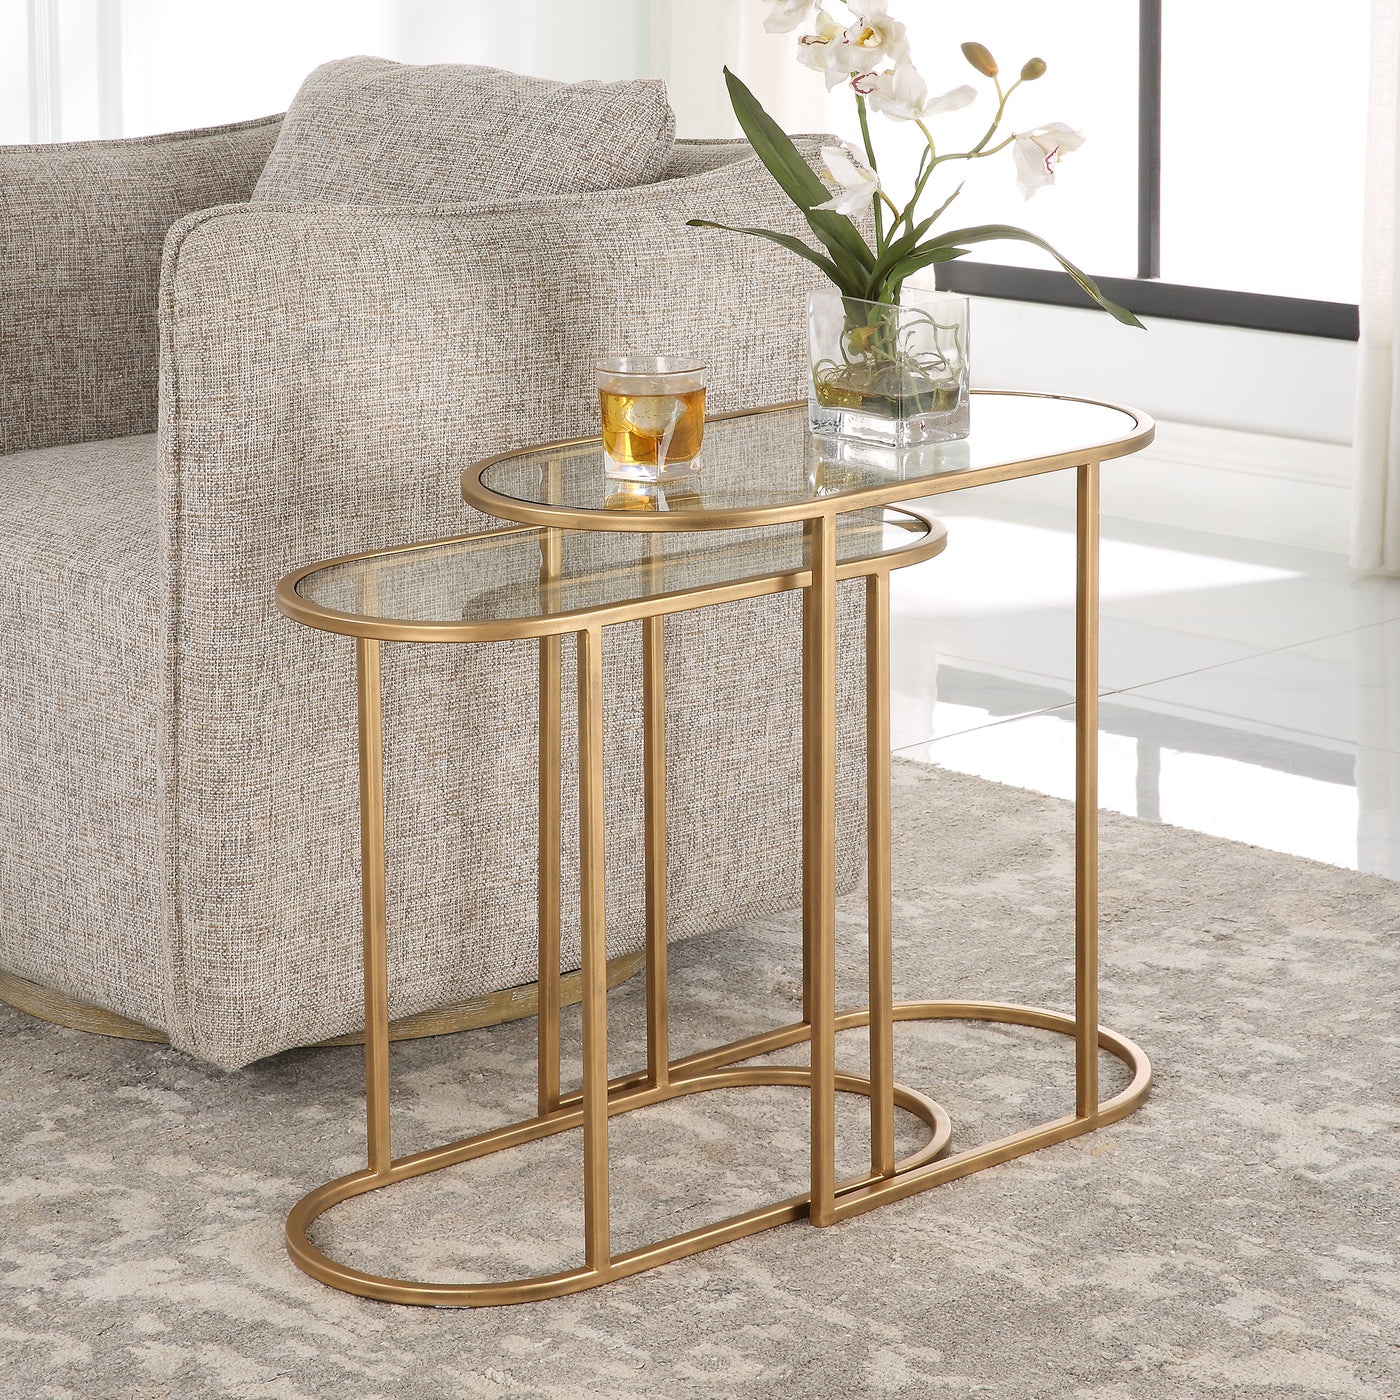 The Brook Haven Nesting Table Set